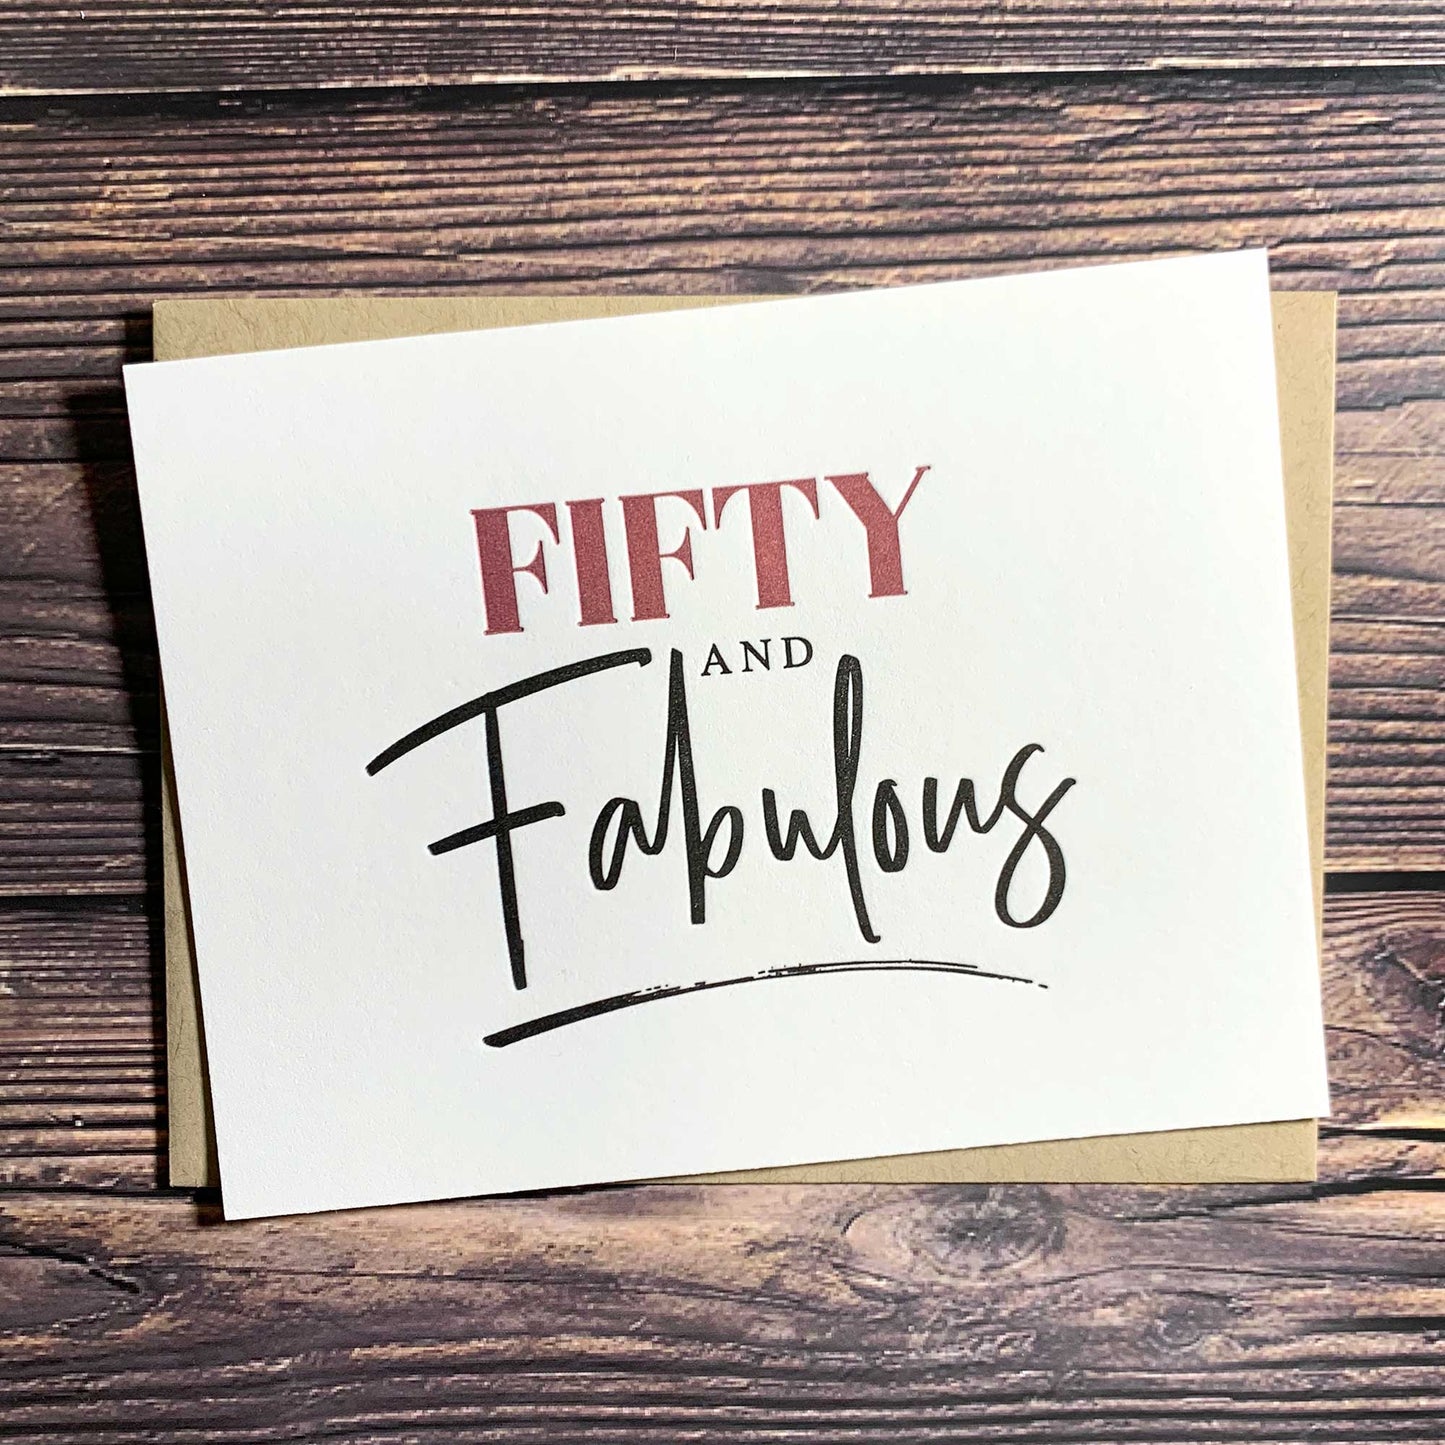 Fifty and Fabulous Birthday Card, Letterpress printed, includes envelope